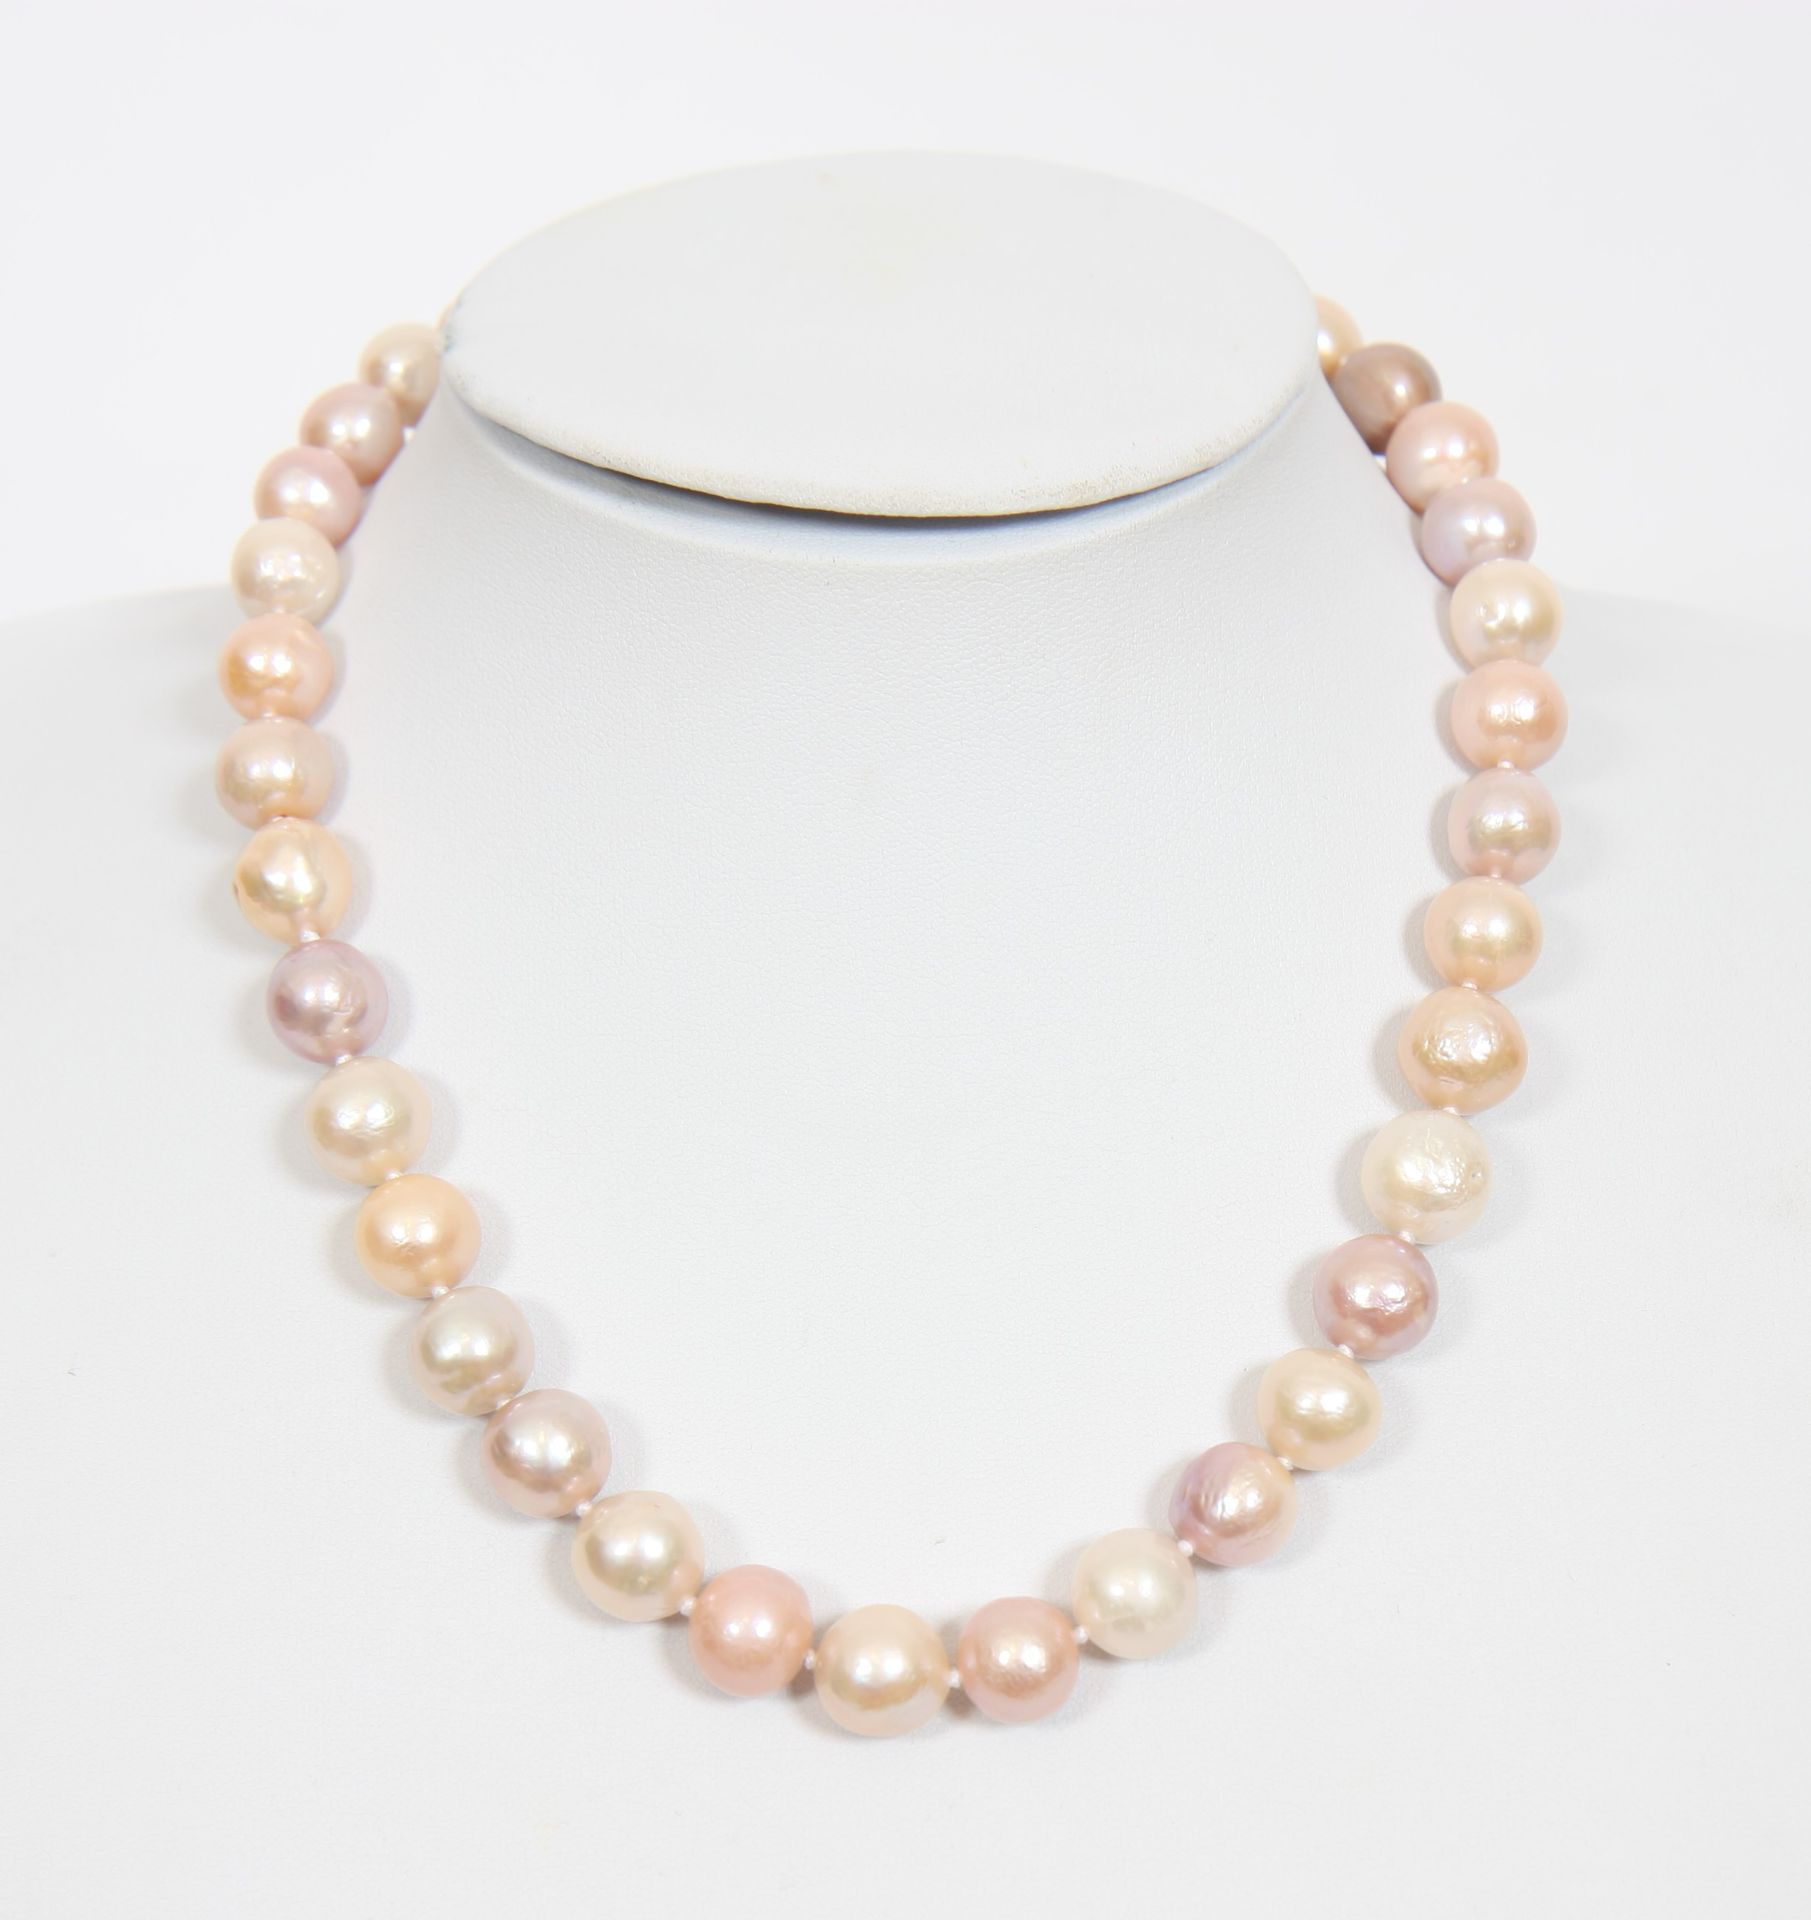 Null NECKLACE OF MULTICOLORED PEARLS

10/12 mm semi-baroque beads with knots bet&hellip;